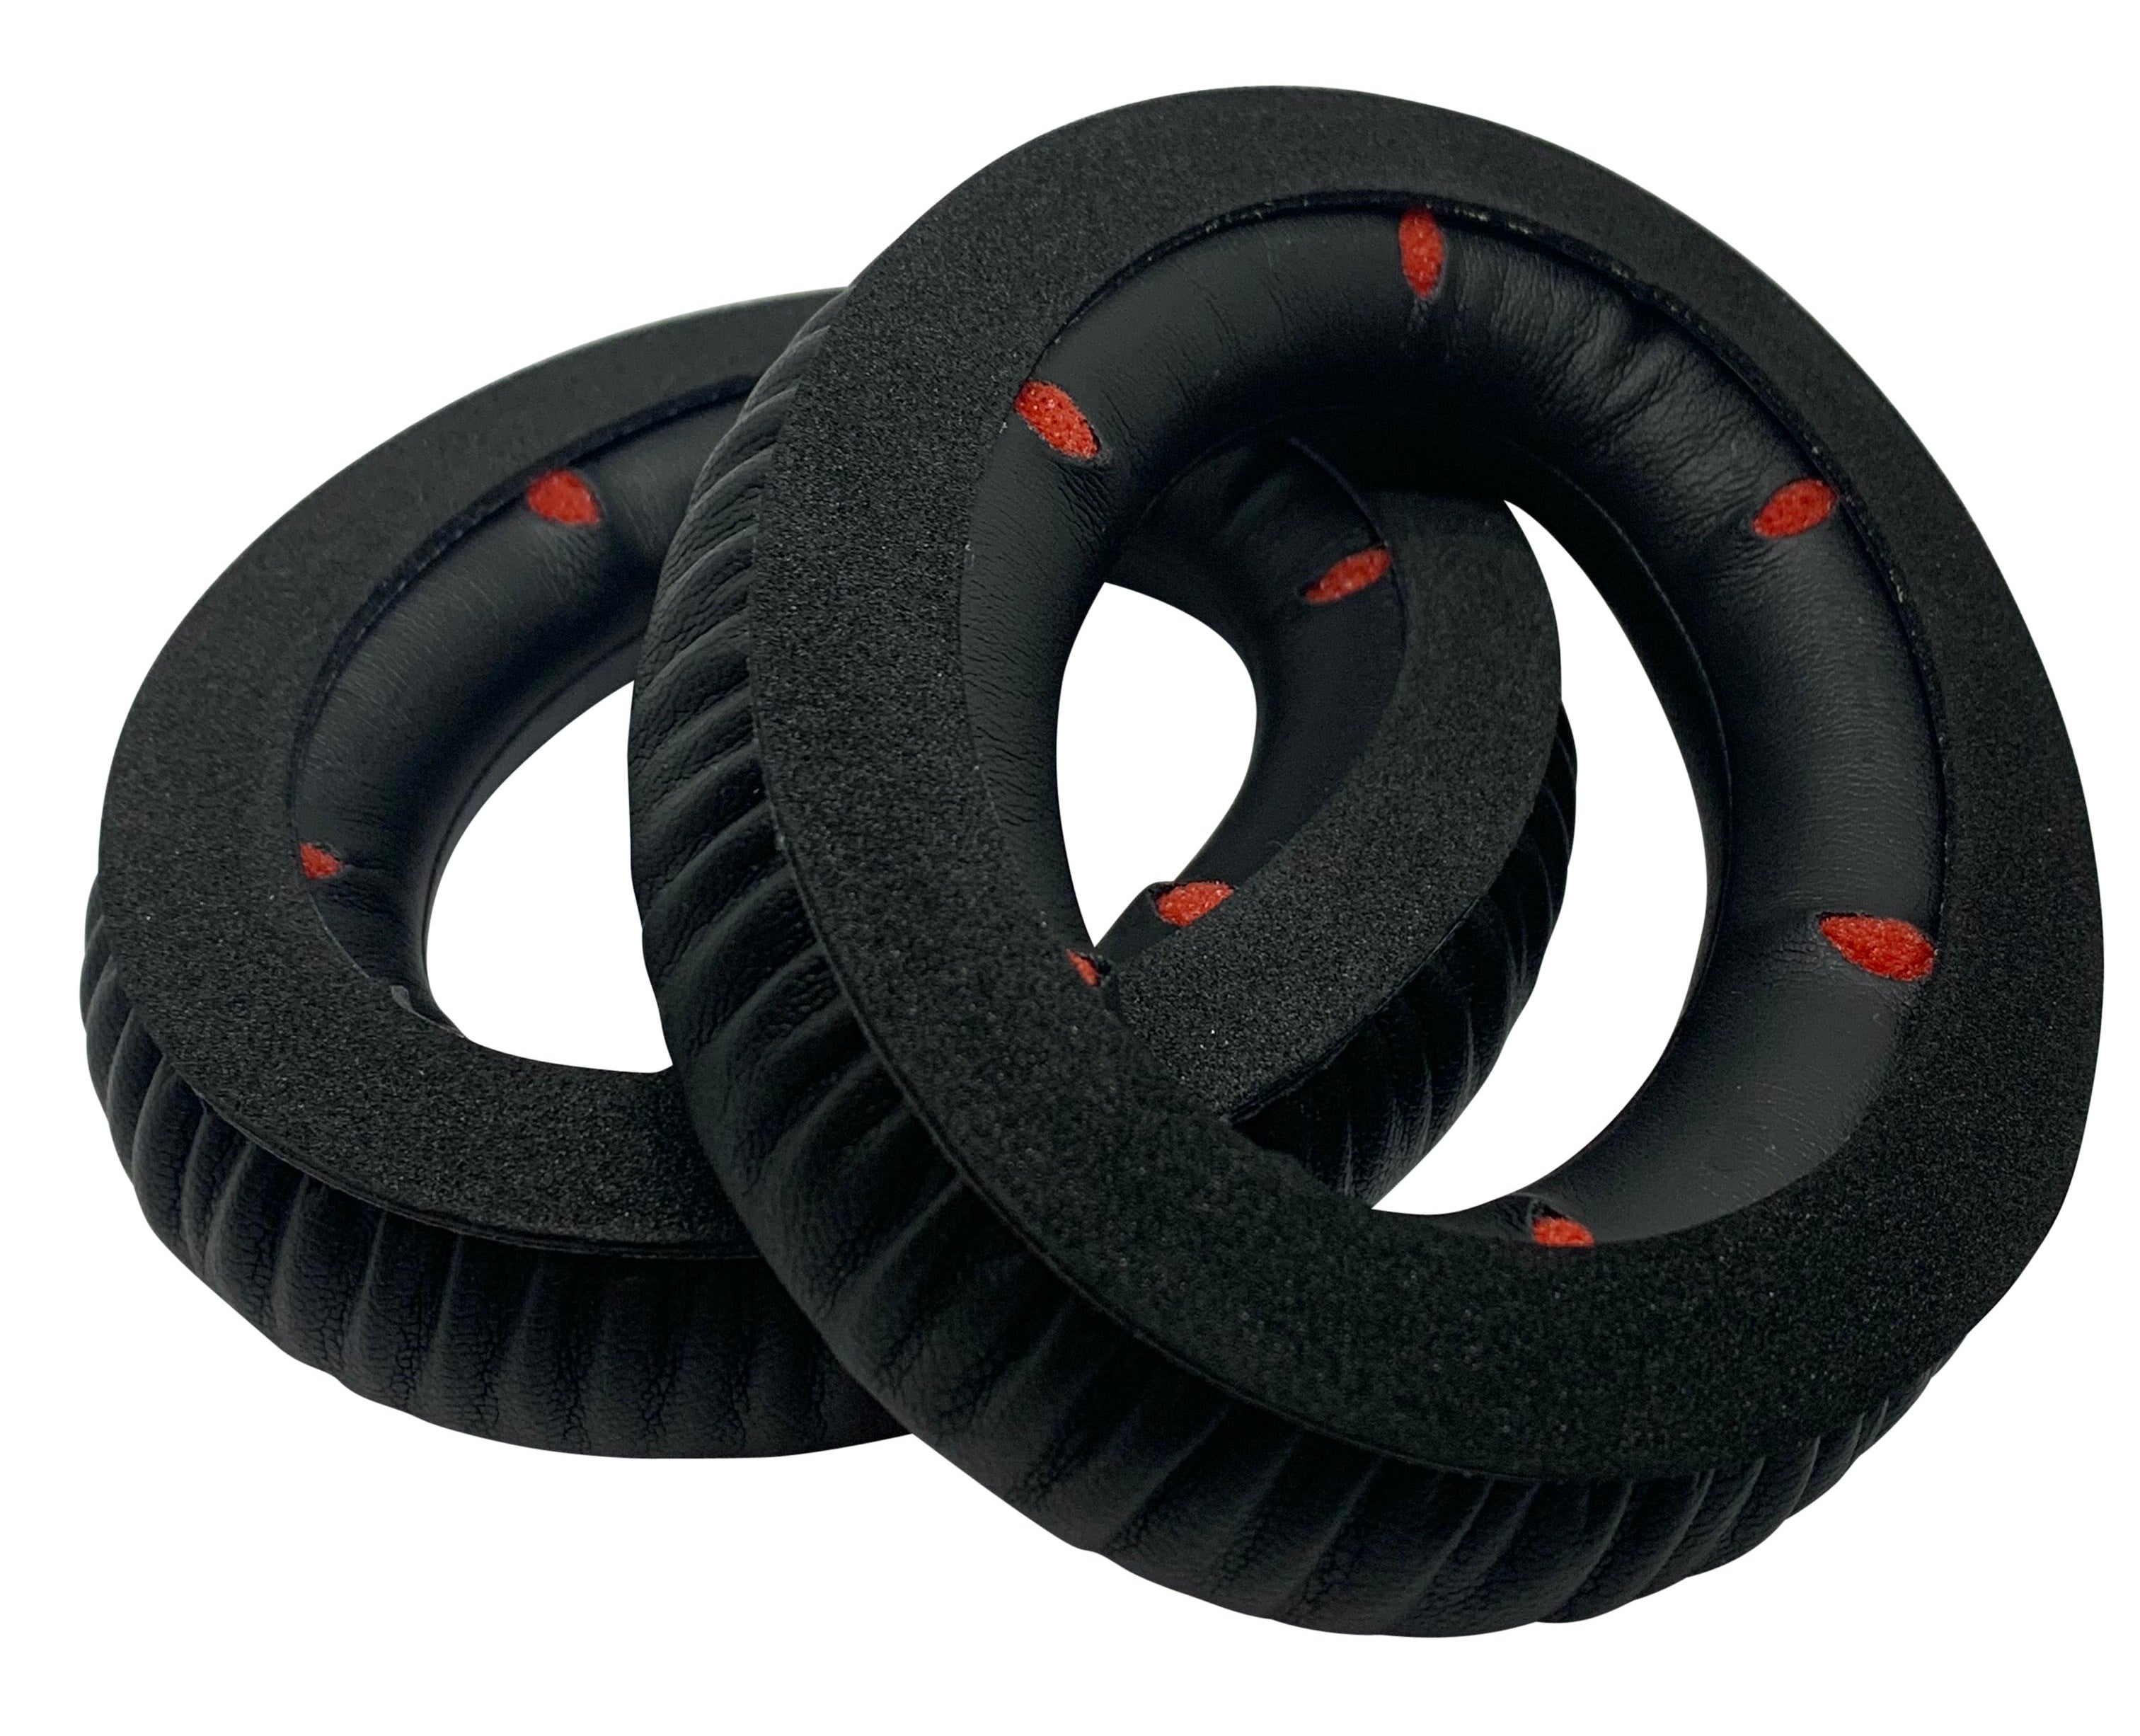 Premium Replacement Ear Pad Cushions for Kingston HyperX Cloud Revolver S Gaming Headset - CentralSound